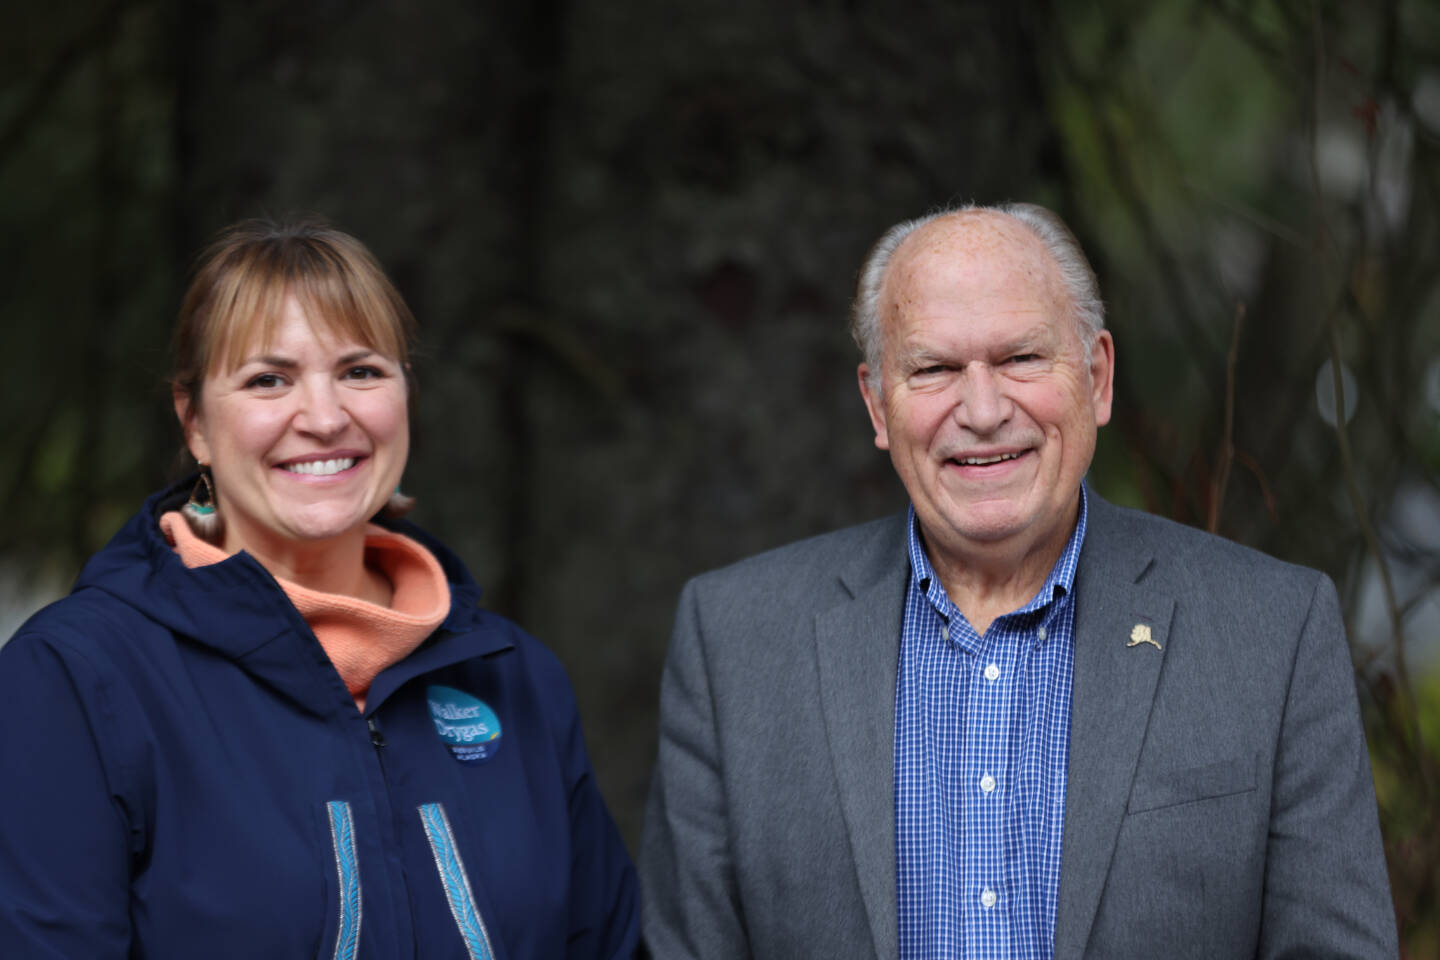 Heidi Drygas, who is running for lieutenant governor, and Bill Walker, who is running for governor, smile outside the Juneau Empire’s offices after an interview this week. Walker said he’s hopeful voters will understand his decision to draw from the Alaska Permanent Fund to fund state government. (Ben Hohenstatt / Juneau Empire)